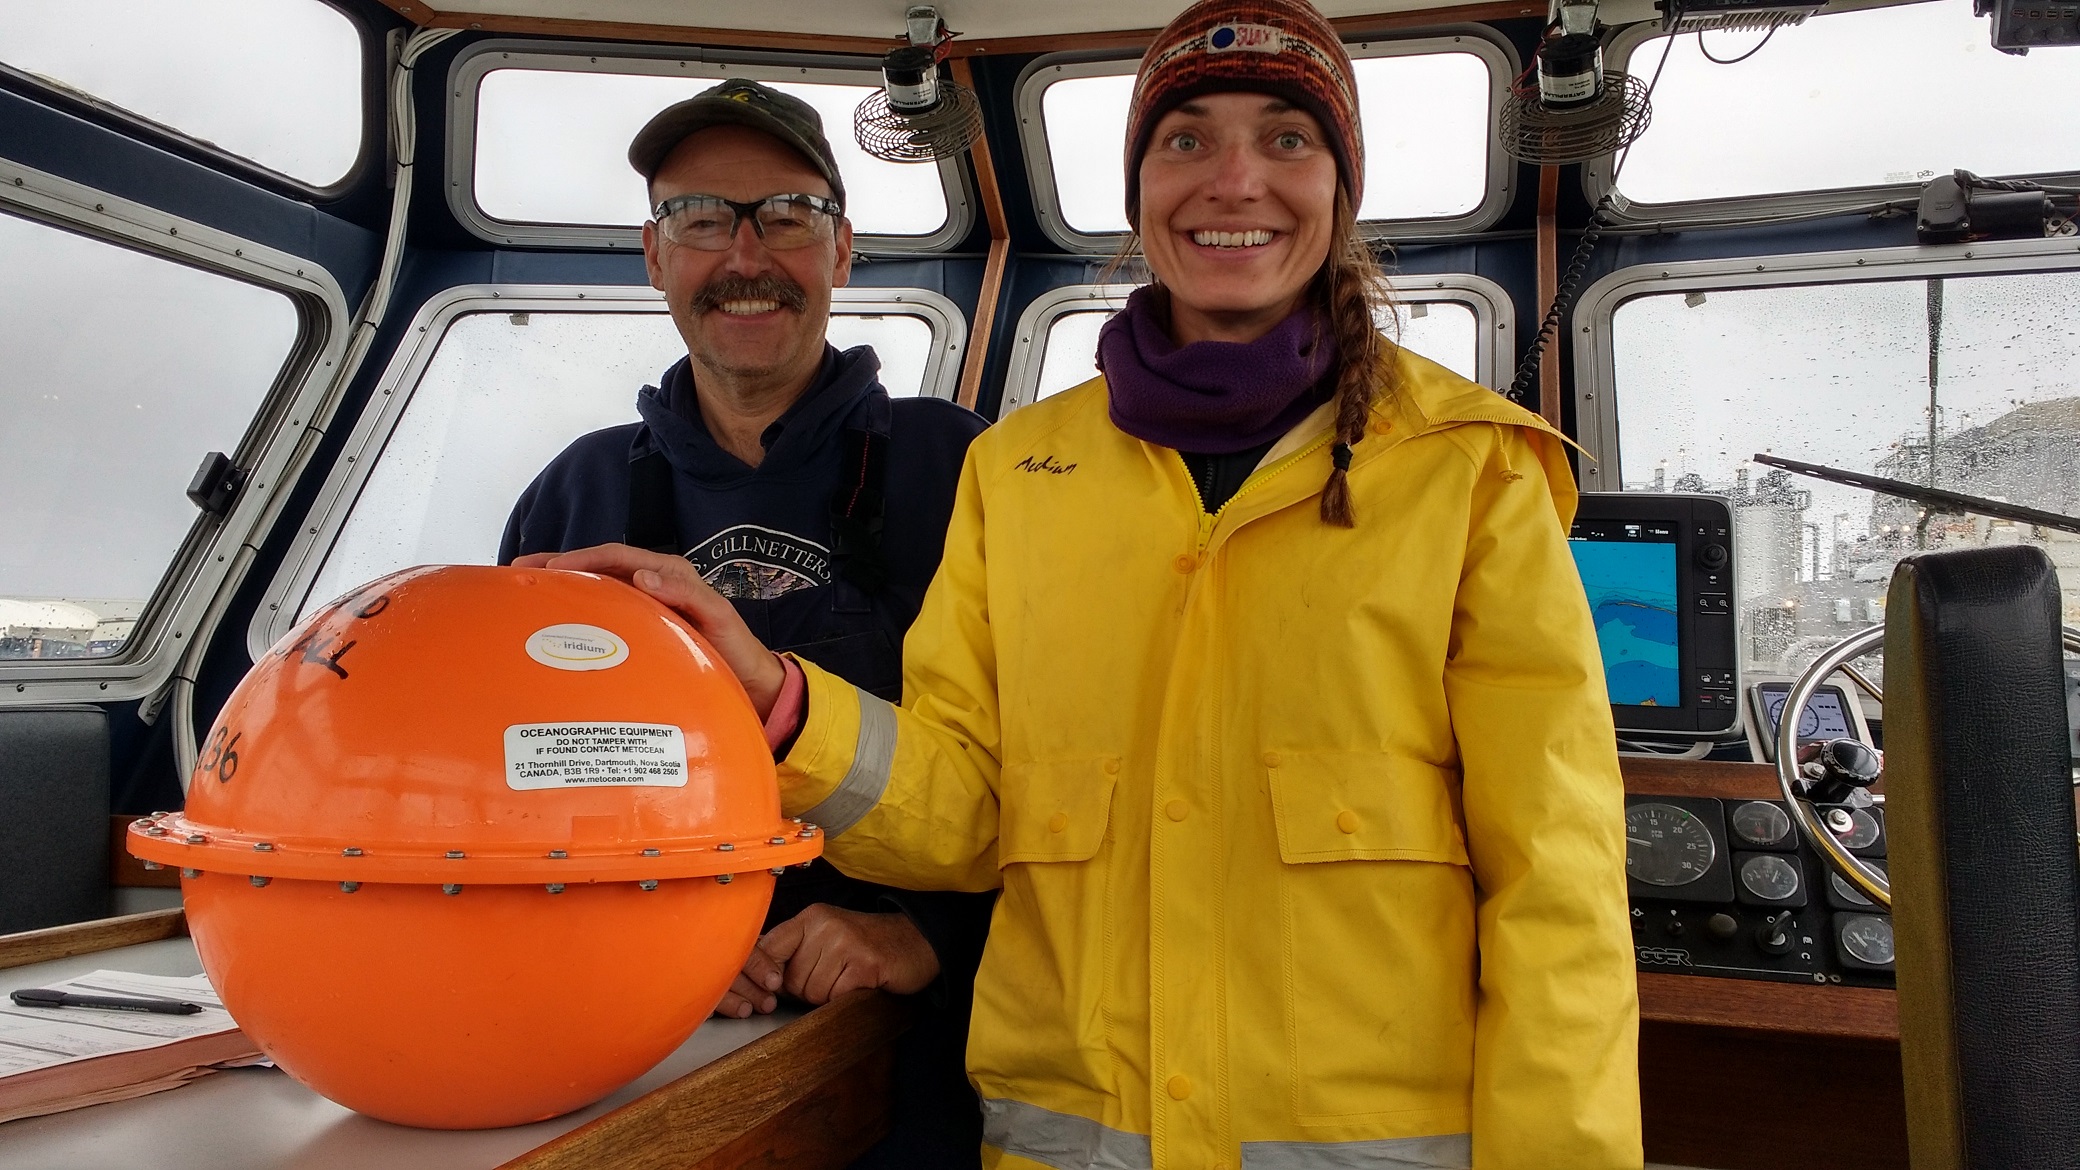 Spill Response Team members practice with MetOcean iSphere oil spill tracking buoys